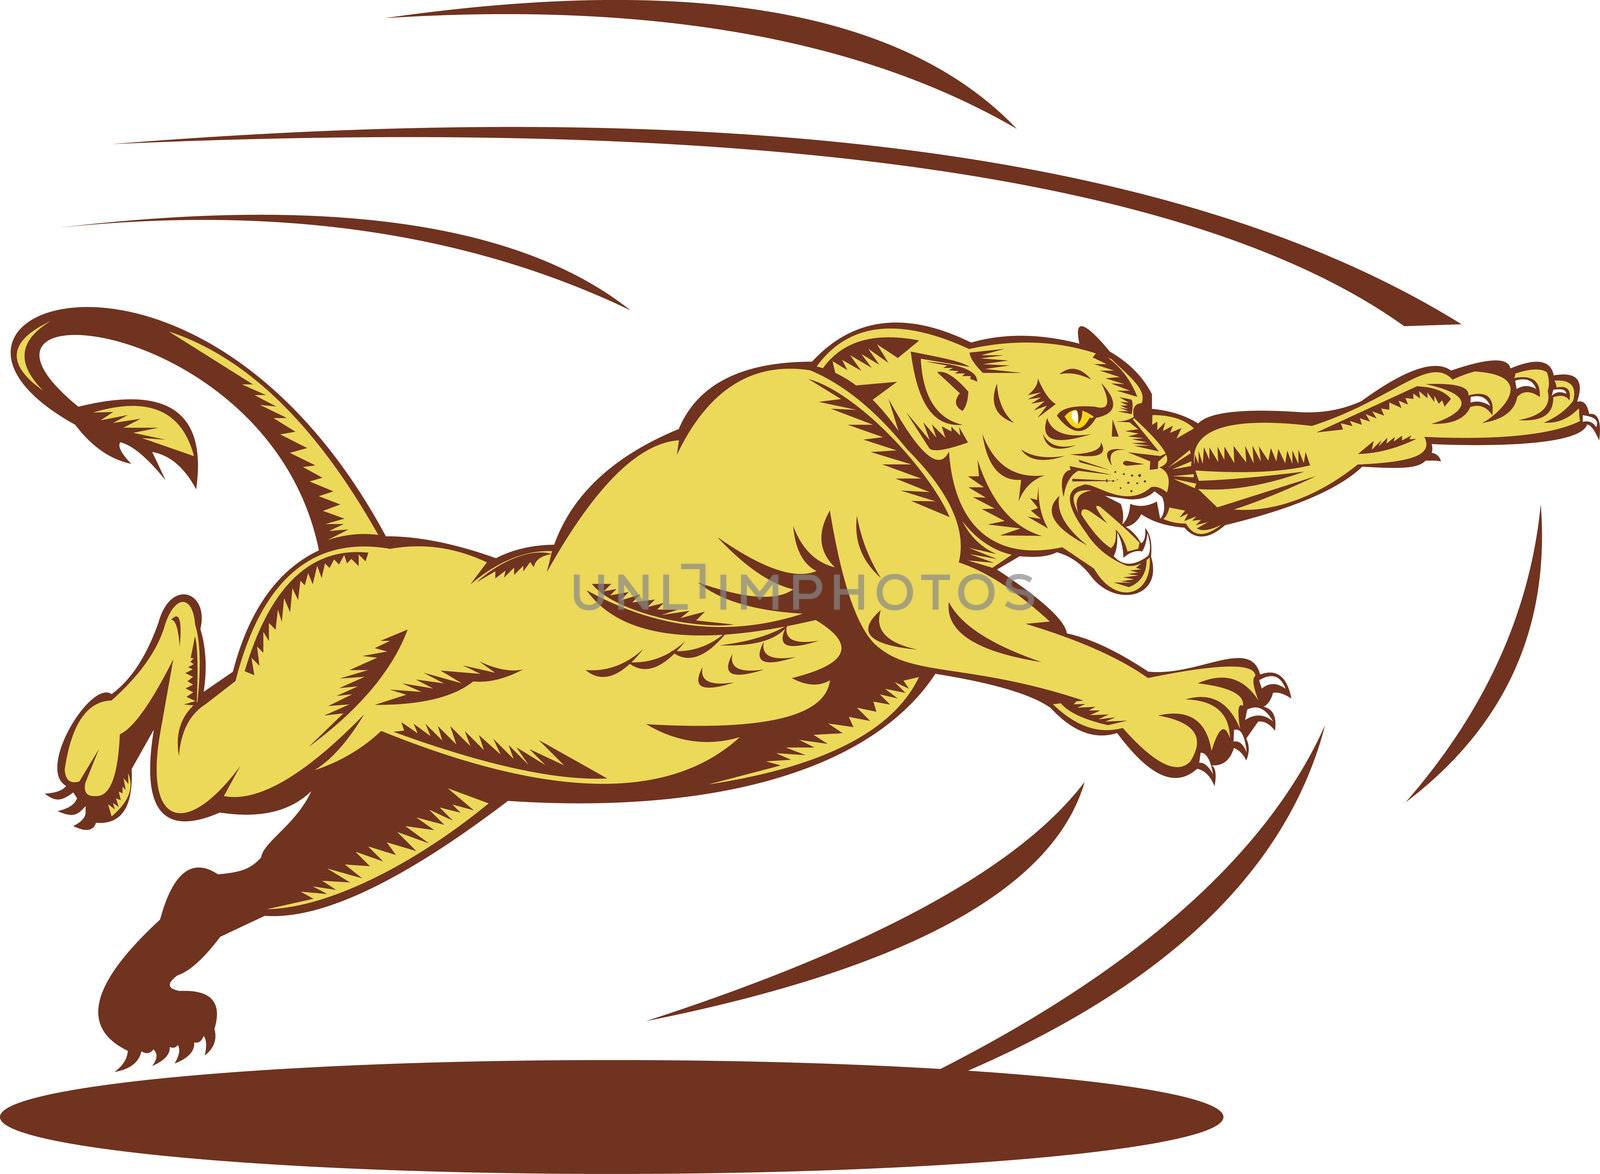 Lioness jumping and attacking by patrimonio